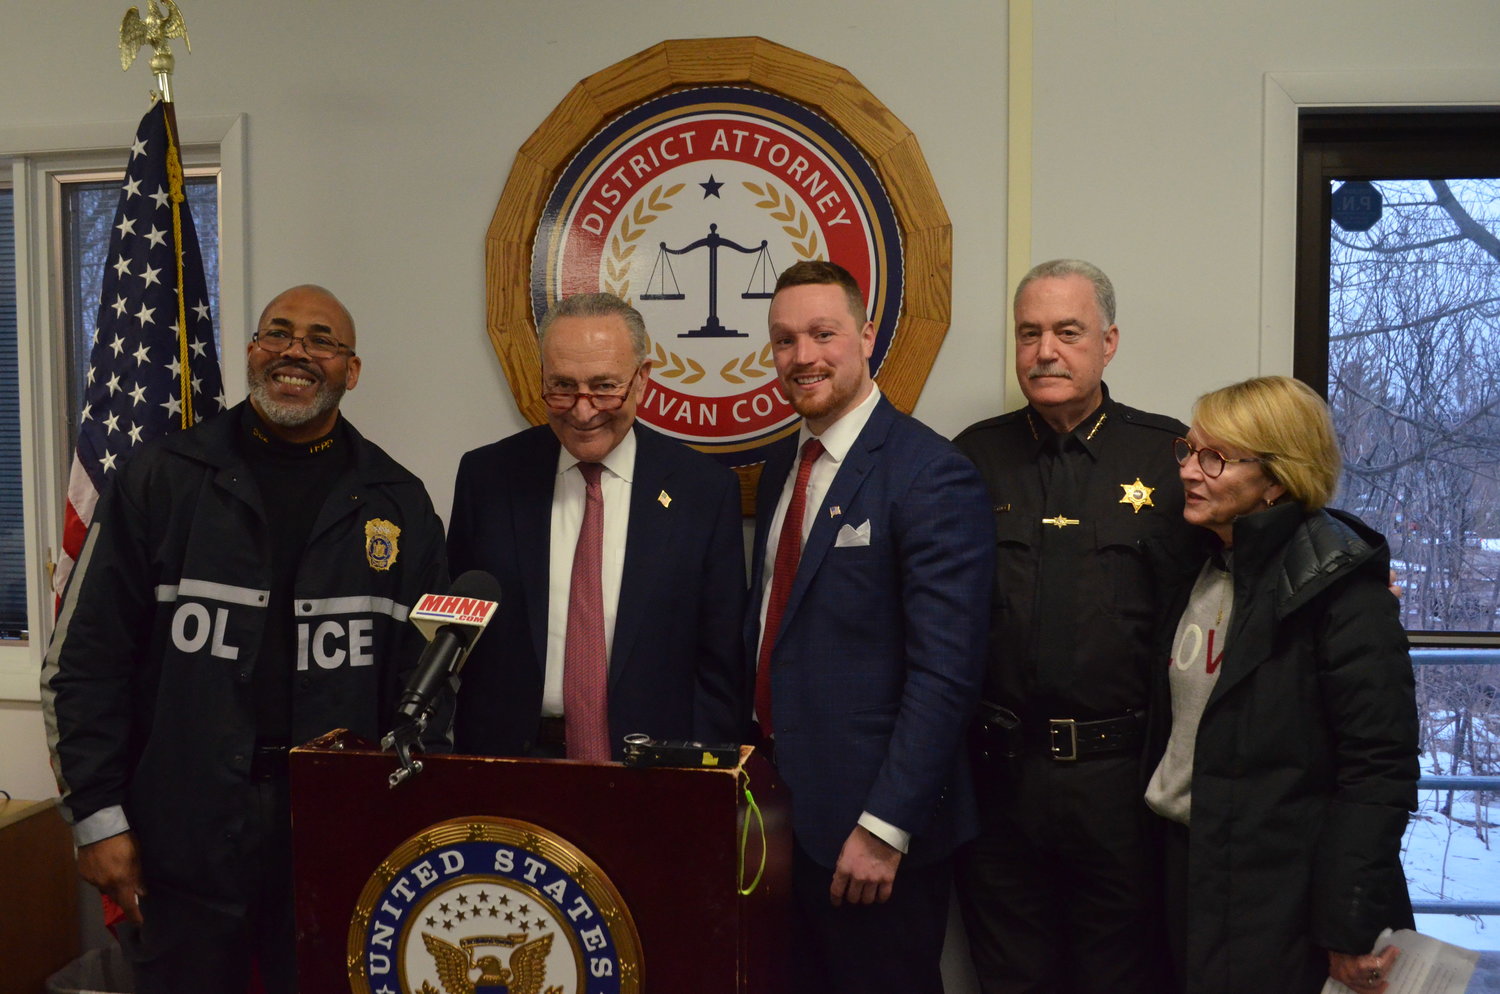 A member of law enforcement, left, Senator Chuck Schumer, District Attorney Brian Conaty, Sheriff Mike Schiff and Assemblywoman Aileen Gunther gather following a meeting to discuss Sullivan County’s HIDTA application.